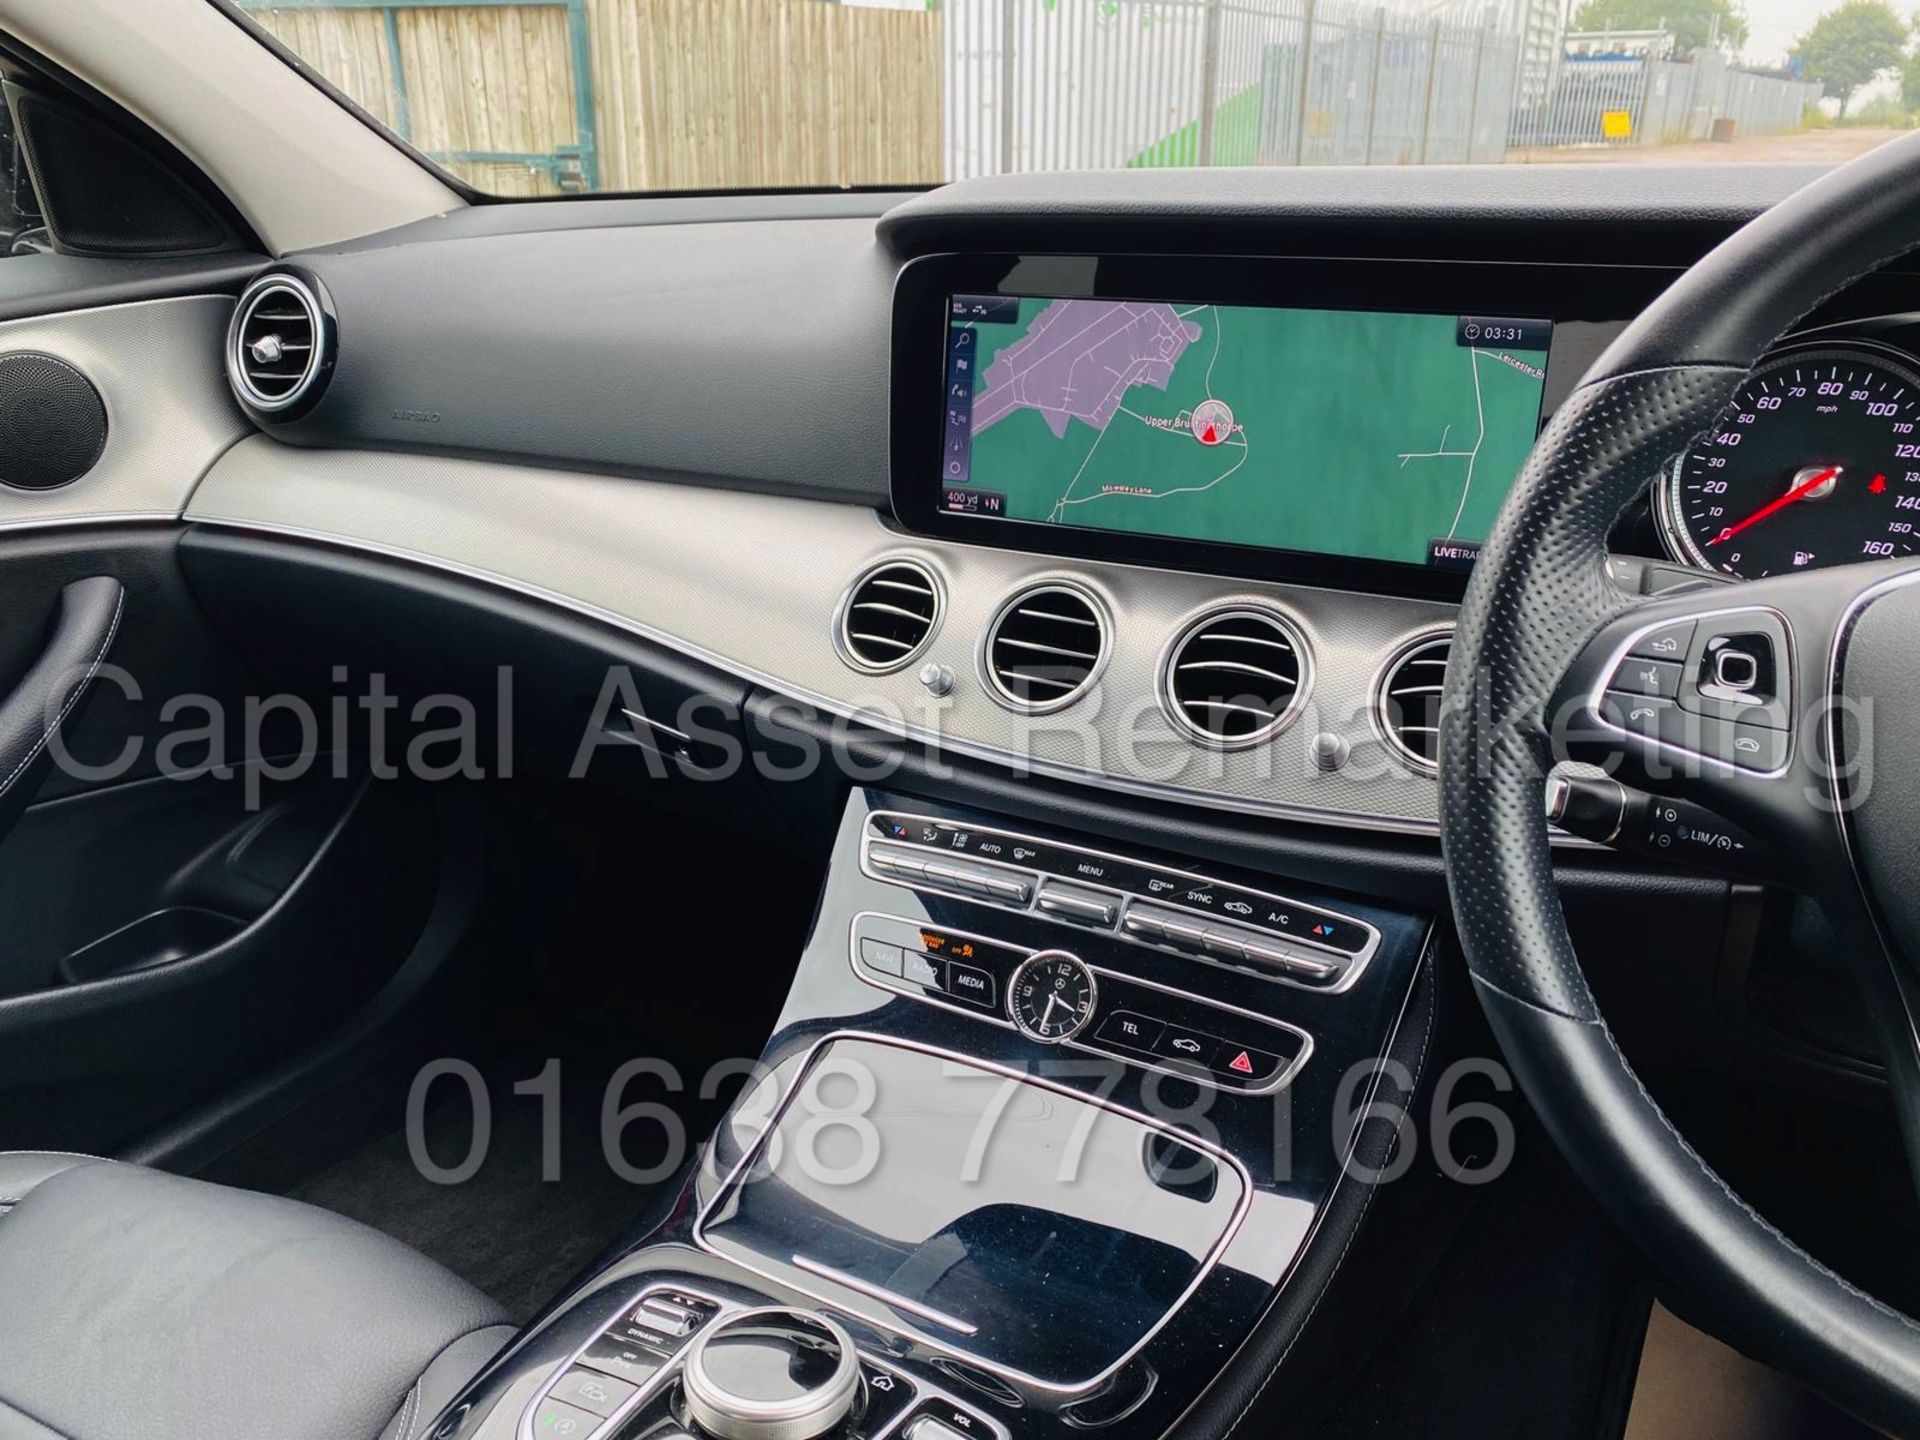 (ON SALE) MERCEDES-BENZ E220D *SALOON* (2018 - NEW MODEL) '9-G TRONIC AUTO - LEATHER - SAT NAV' - Image 37 of 52